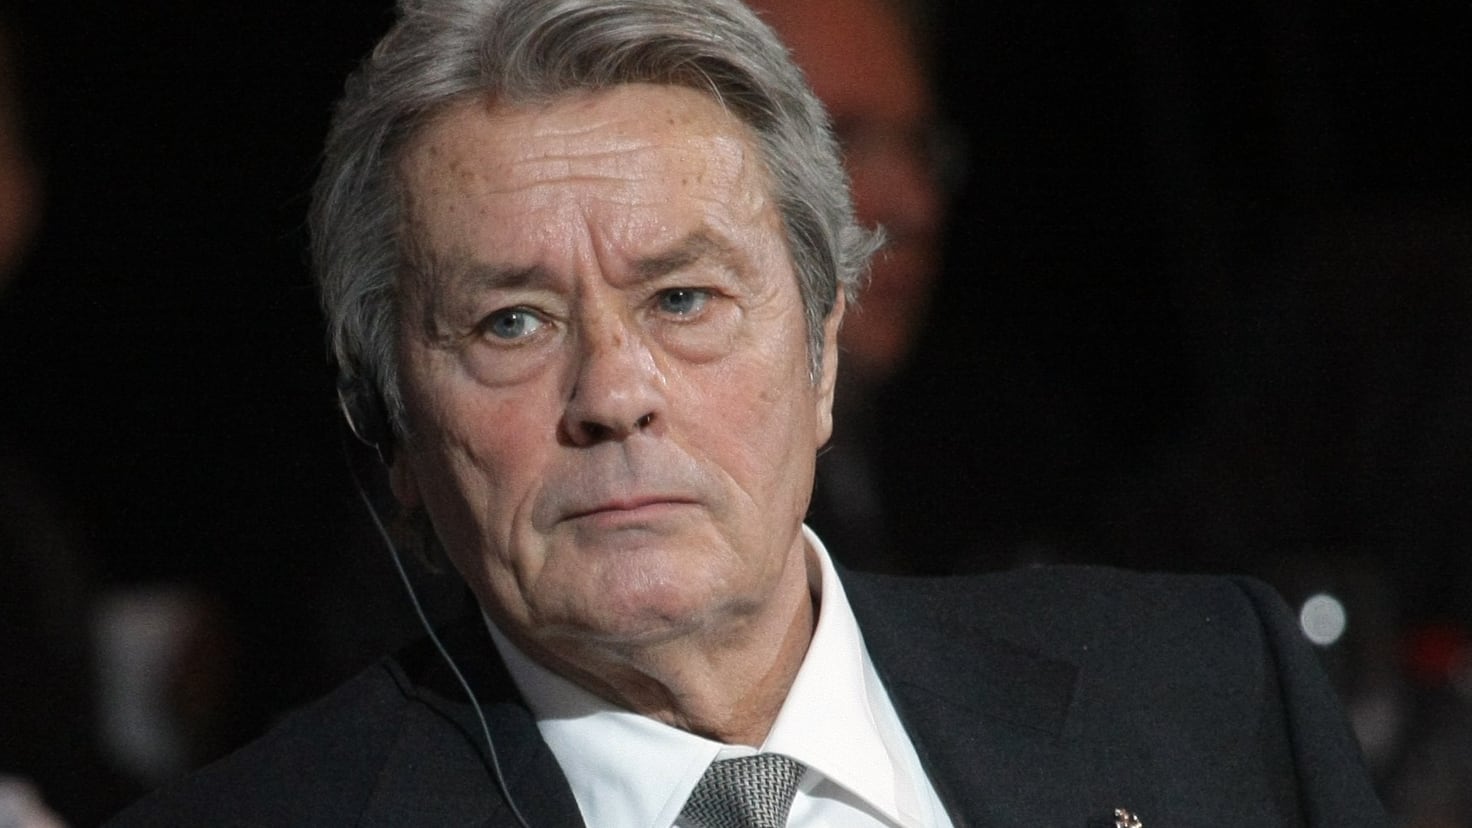 They confiscate 72 firearms from Alain Delon due to a significant suicide risk
